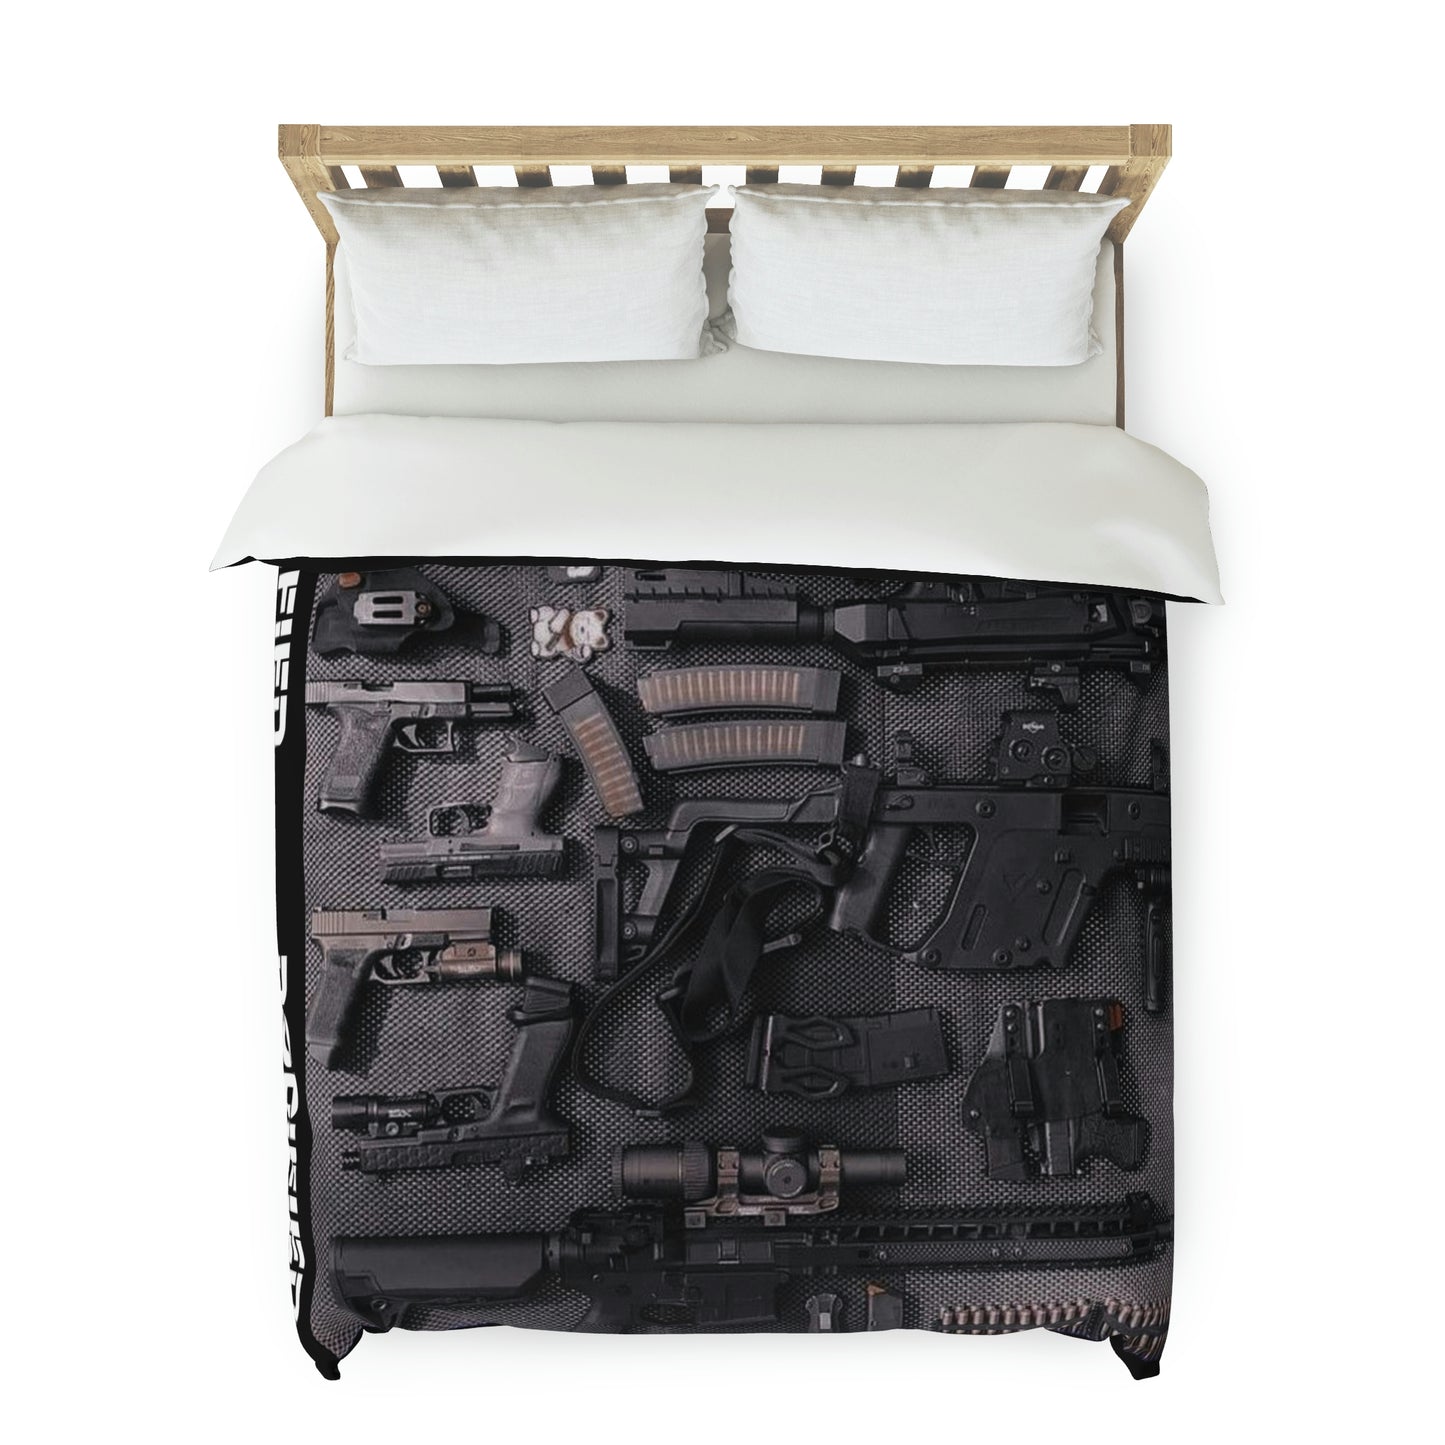 DOPiFiED Sticks & Switches Duvet Cover